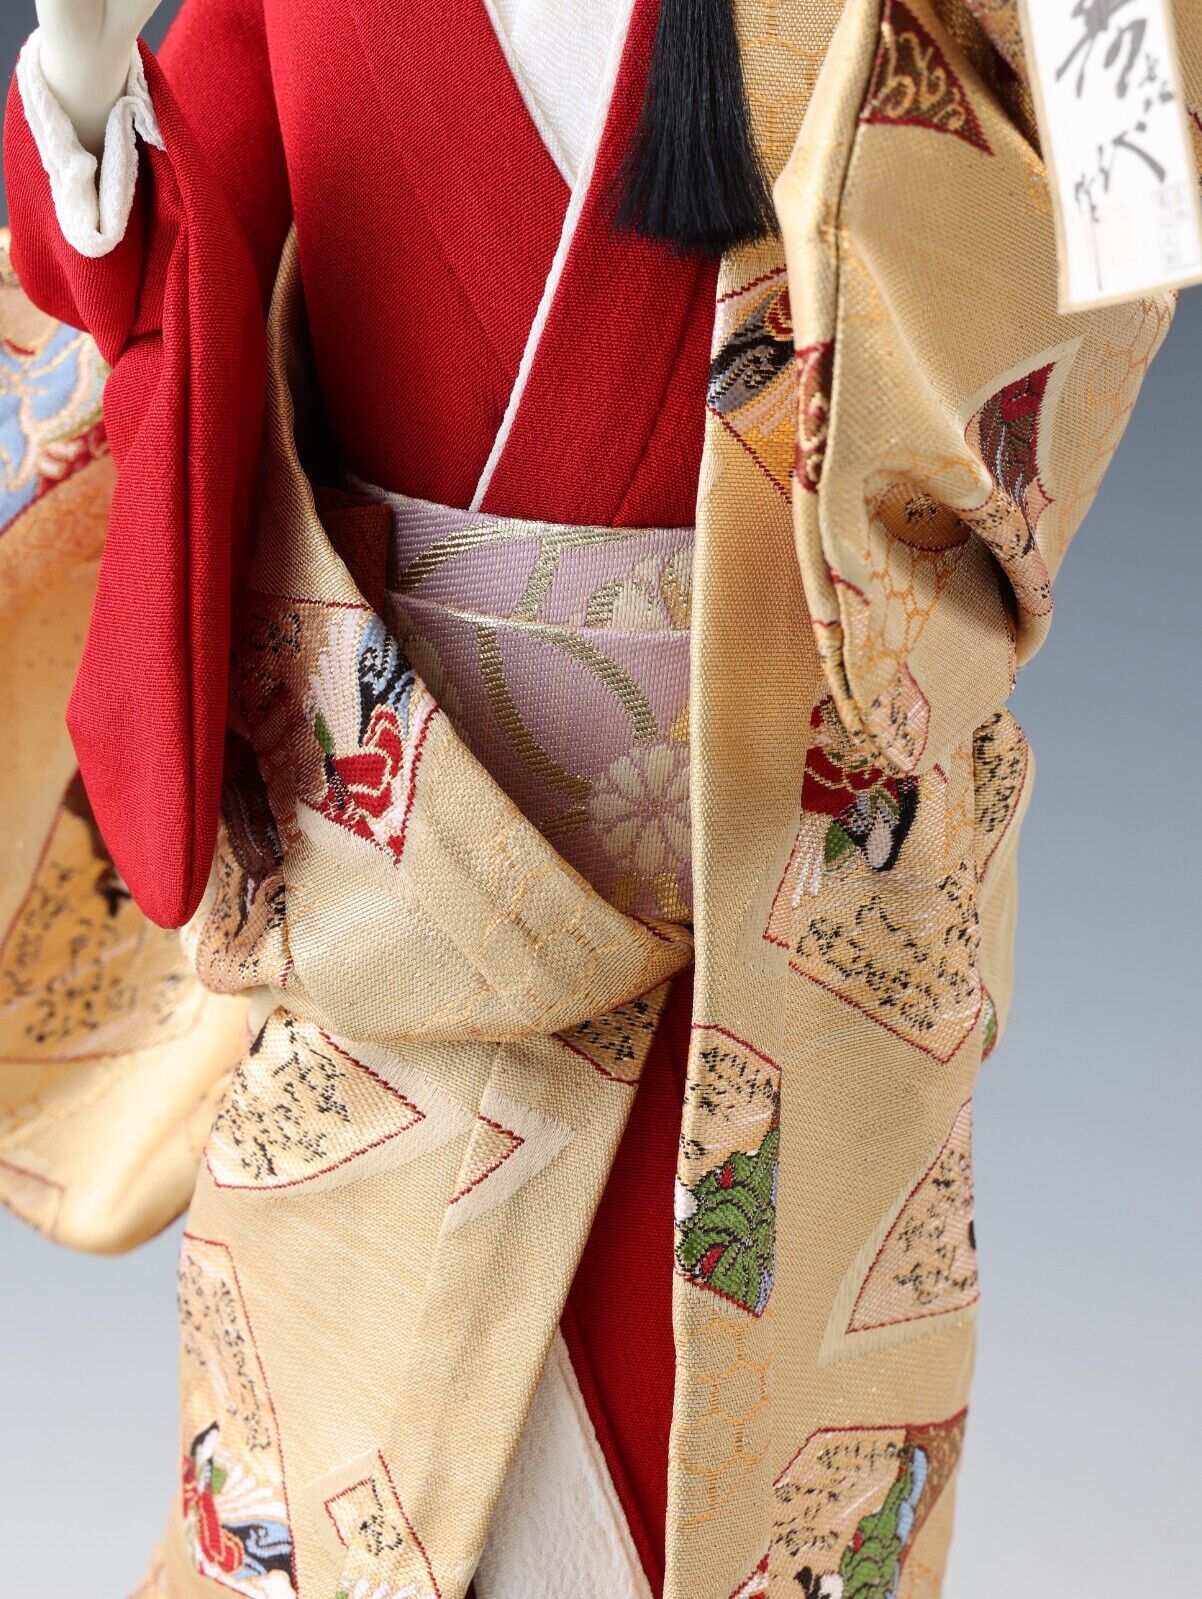 Collectible Vintage Japanese Geisha Doll in Traditional Kimono with Fan Showa Era.